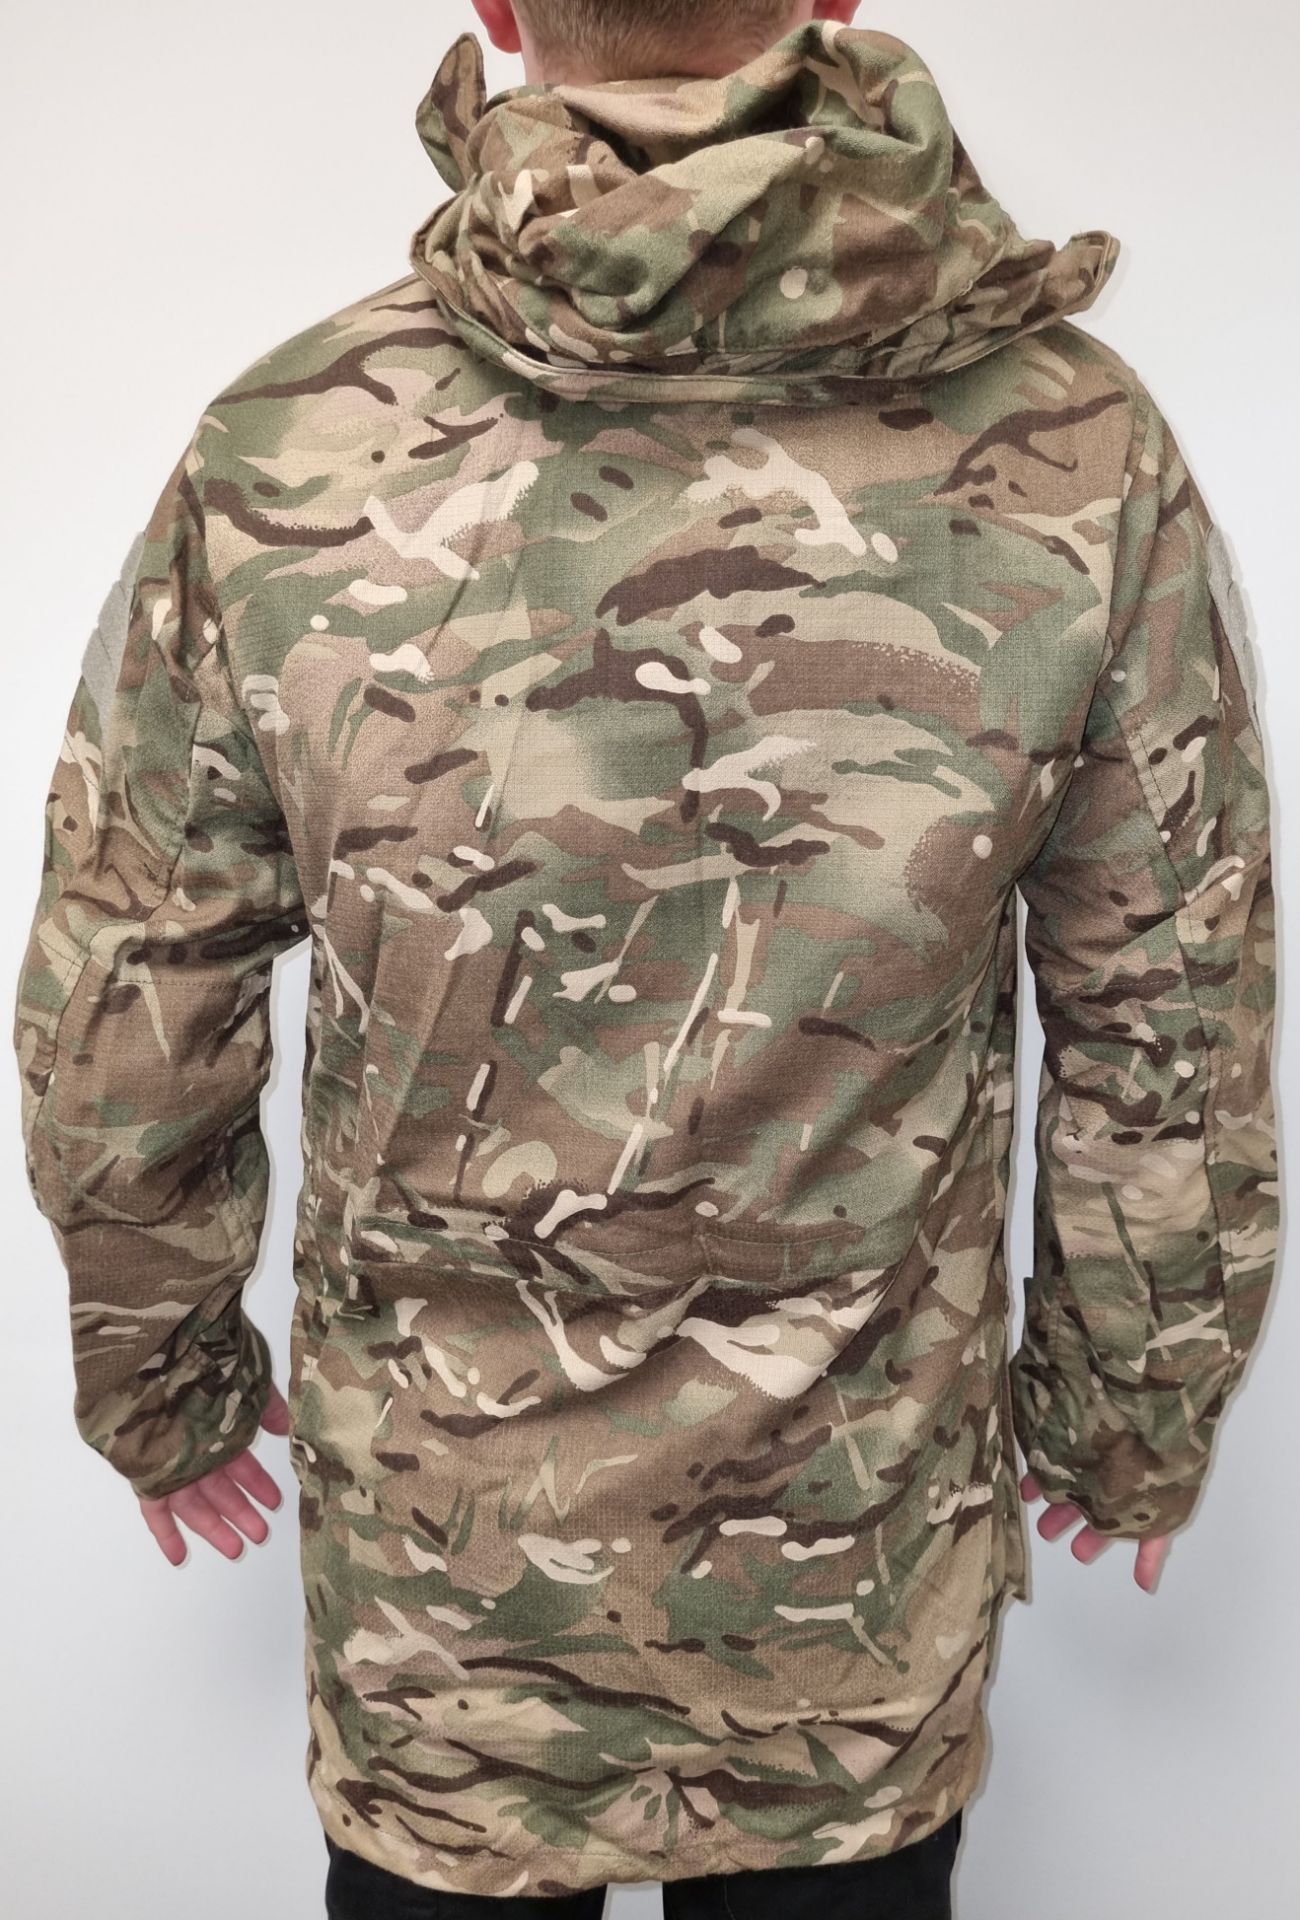 50x British Army MTP windproof smocks - mixed grades and sizes - Image 6 of 9